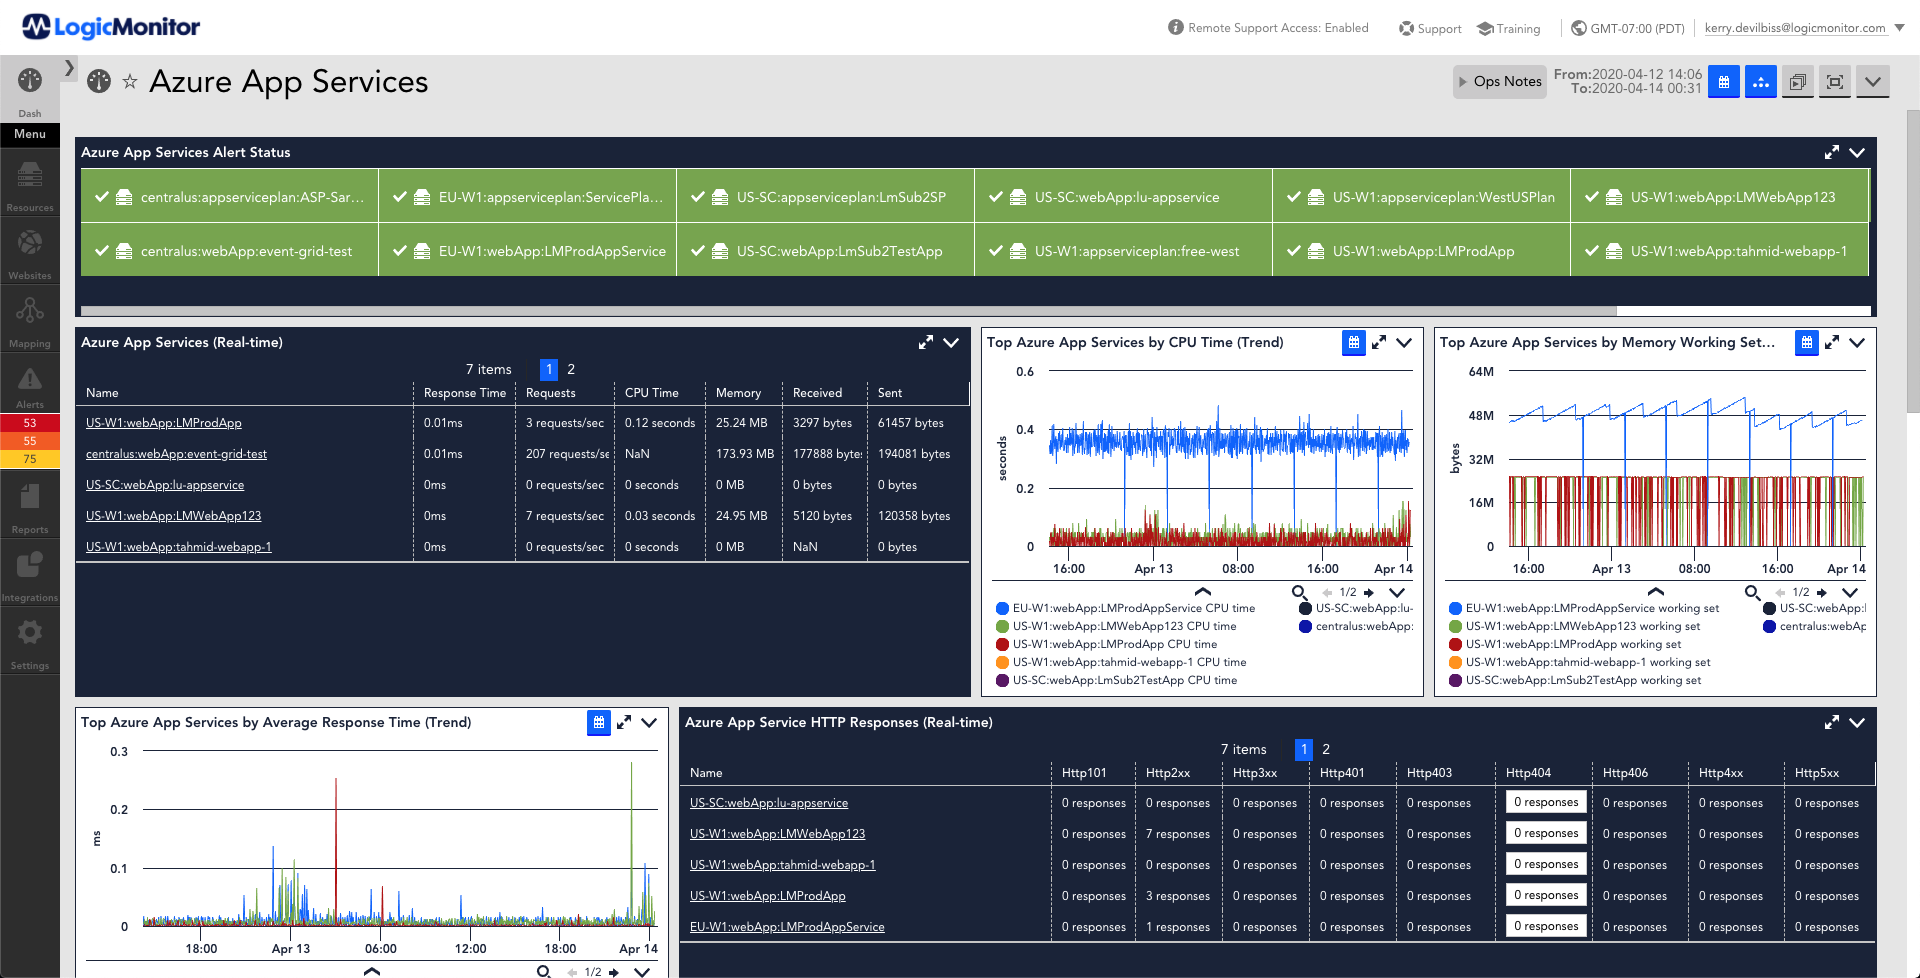 This dashboard provides an a listing of various metrics that are monitored for Azure App Services. The metrics displayed are alert status, app services statistics, CPU over time, memory over time, response time over time, response time